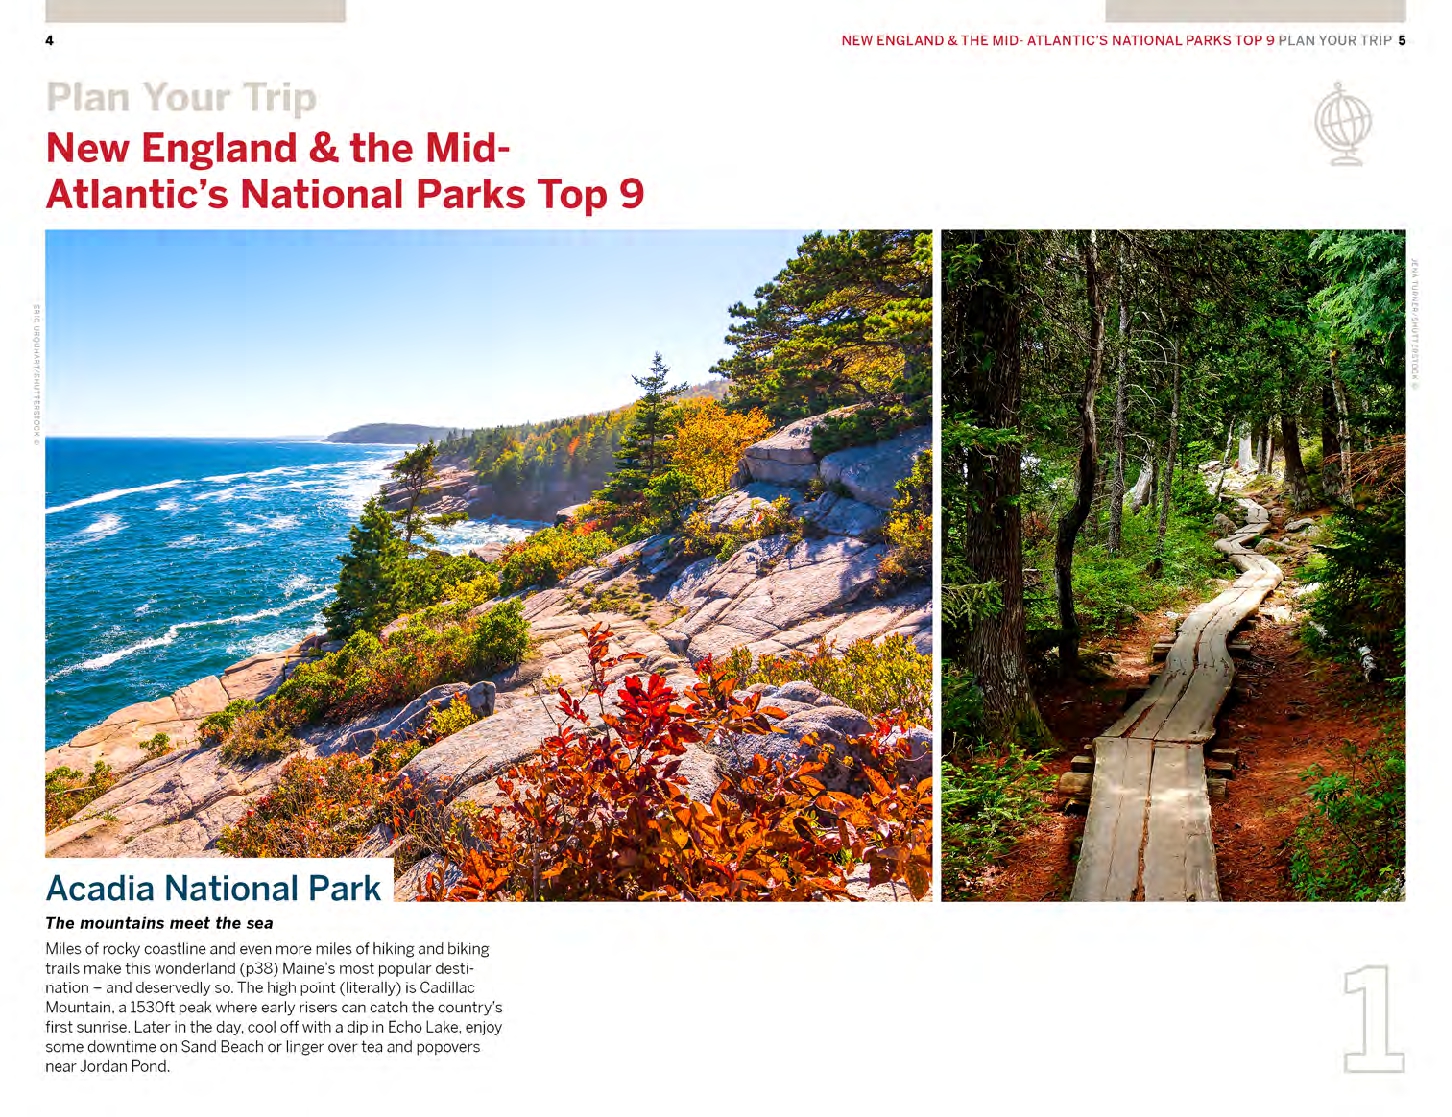 New England & the Mid-Atlantic's National Parks 1